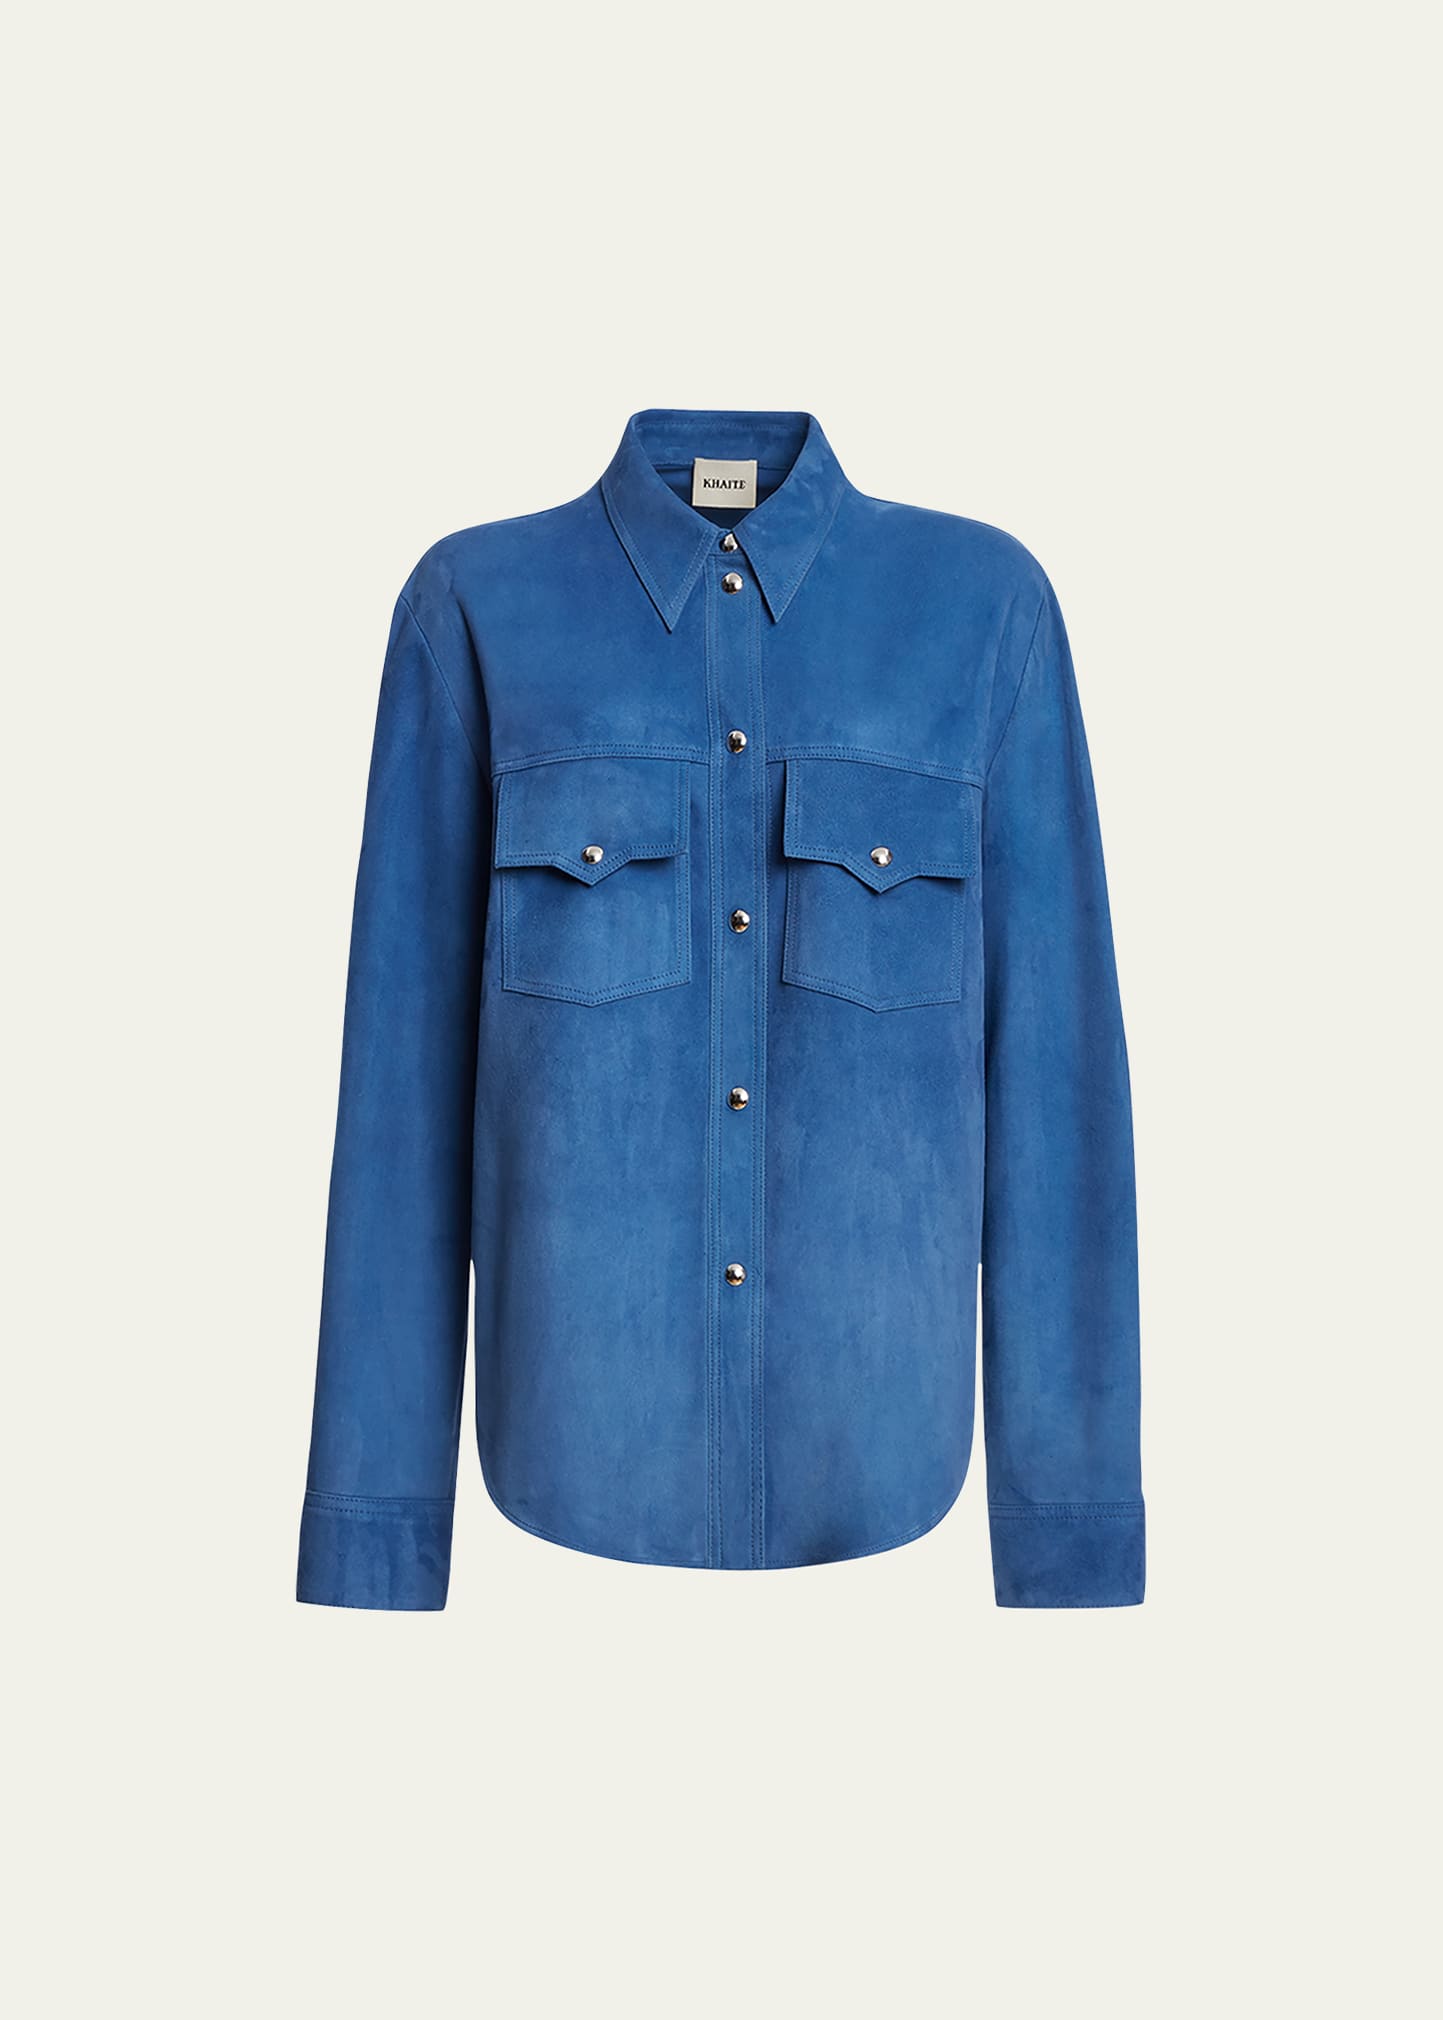 Khaite Jinn Suede Leather Collared Top In Blue